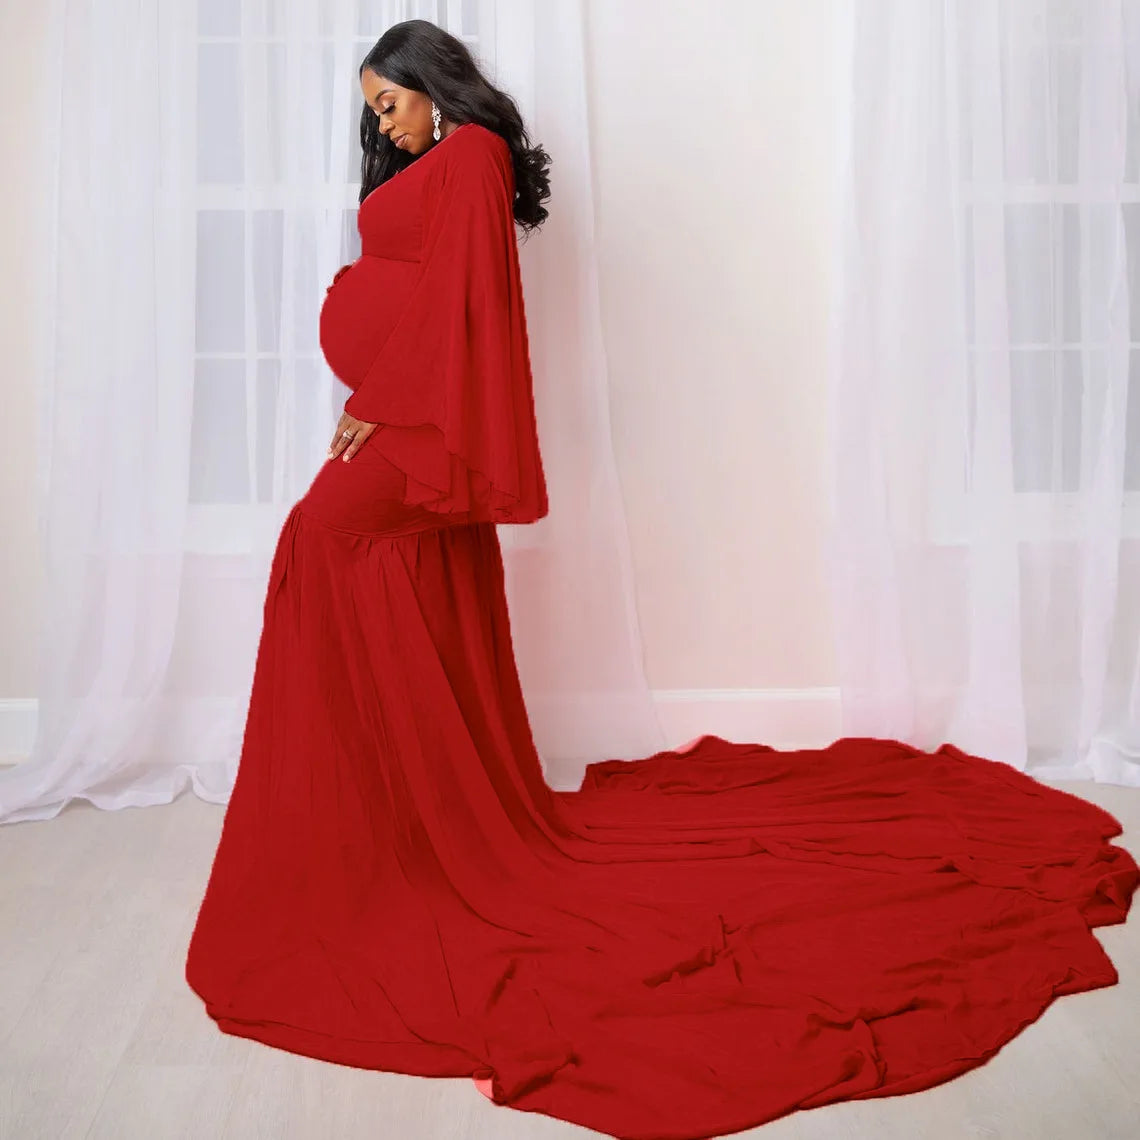 Photoshoot Long Sleeve Maxi Maternity Photography Dresses Photoshoot Fitted Gown Elegant Pregnancy Dress Pregnant Women Long Tail Dress